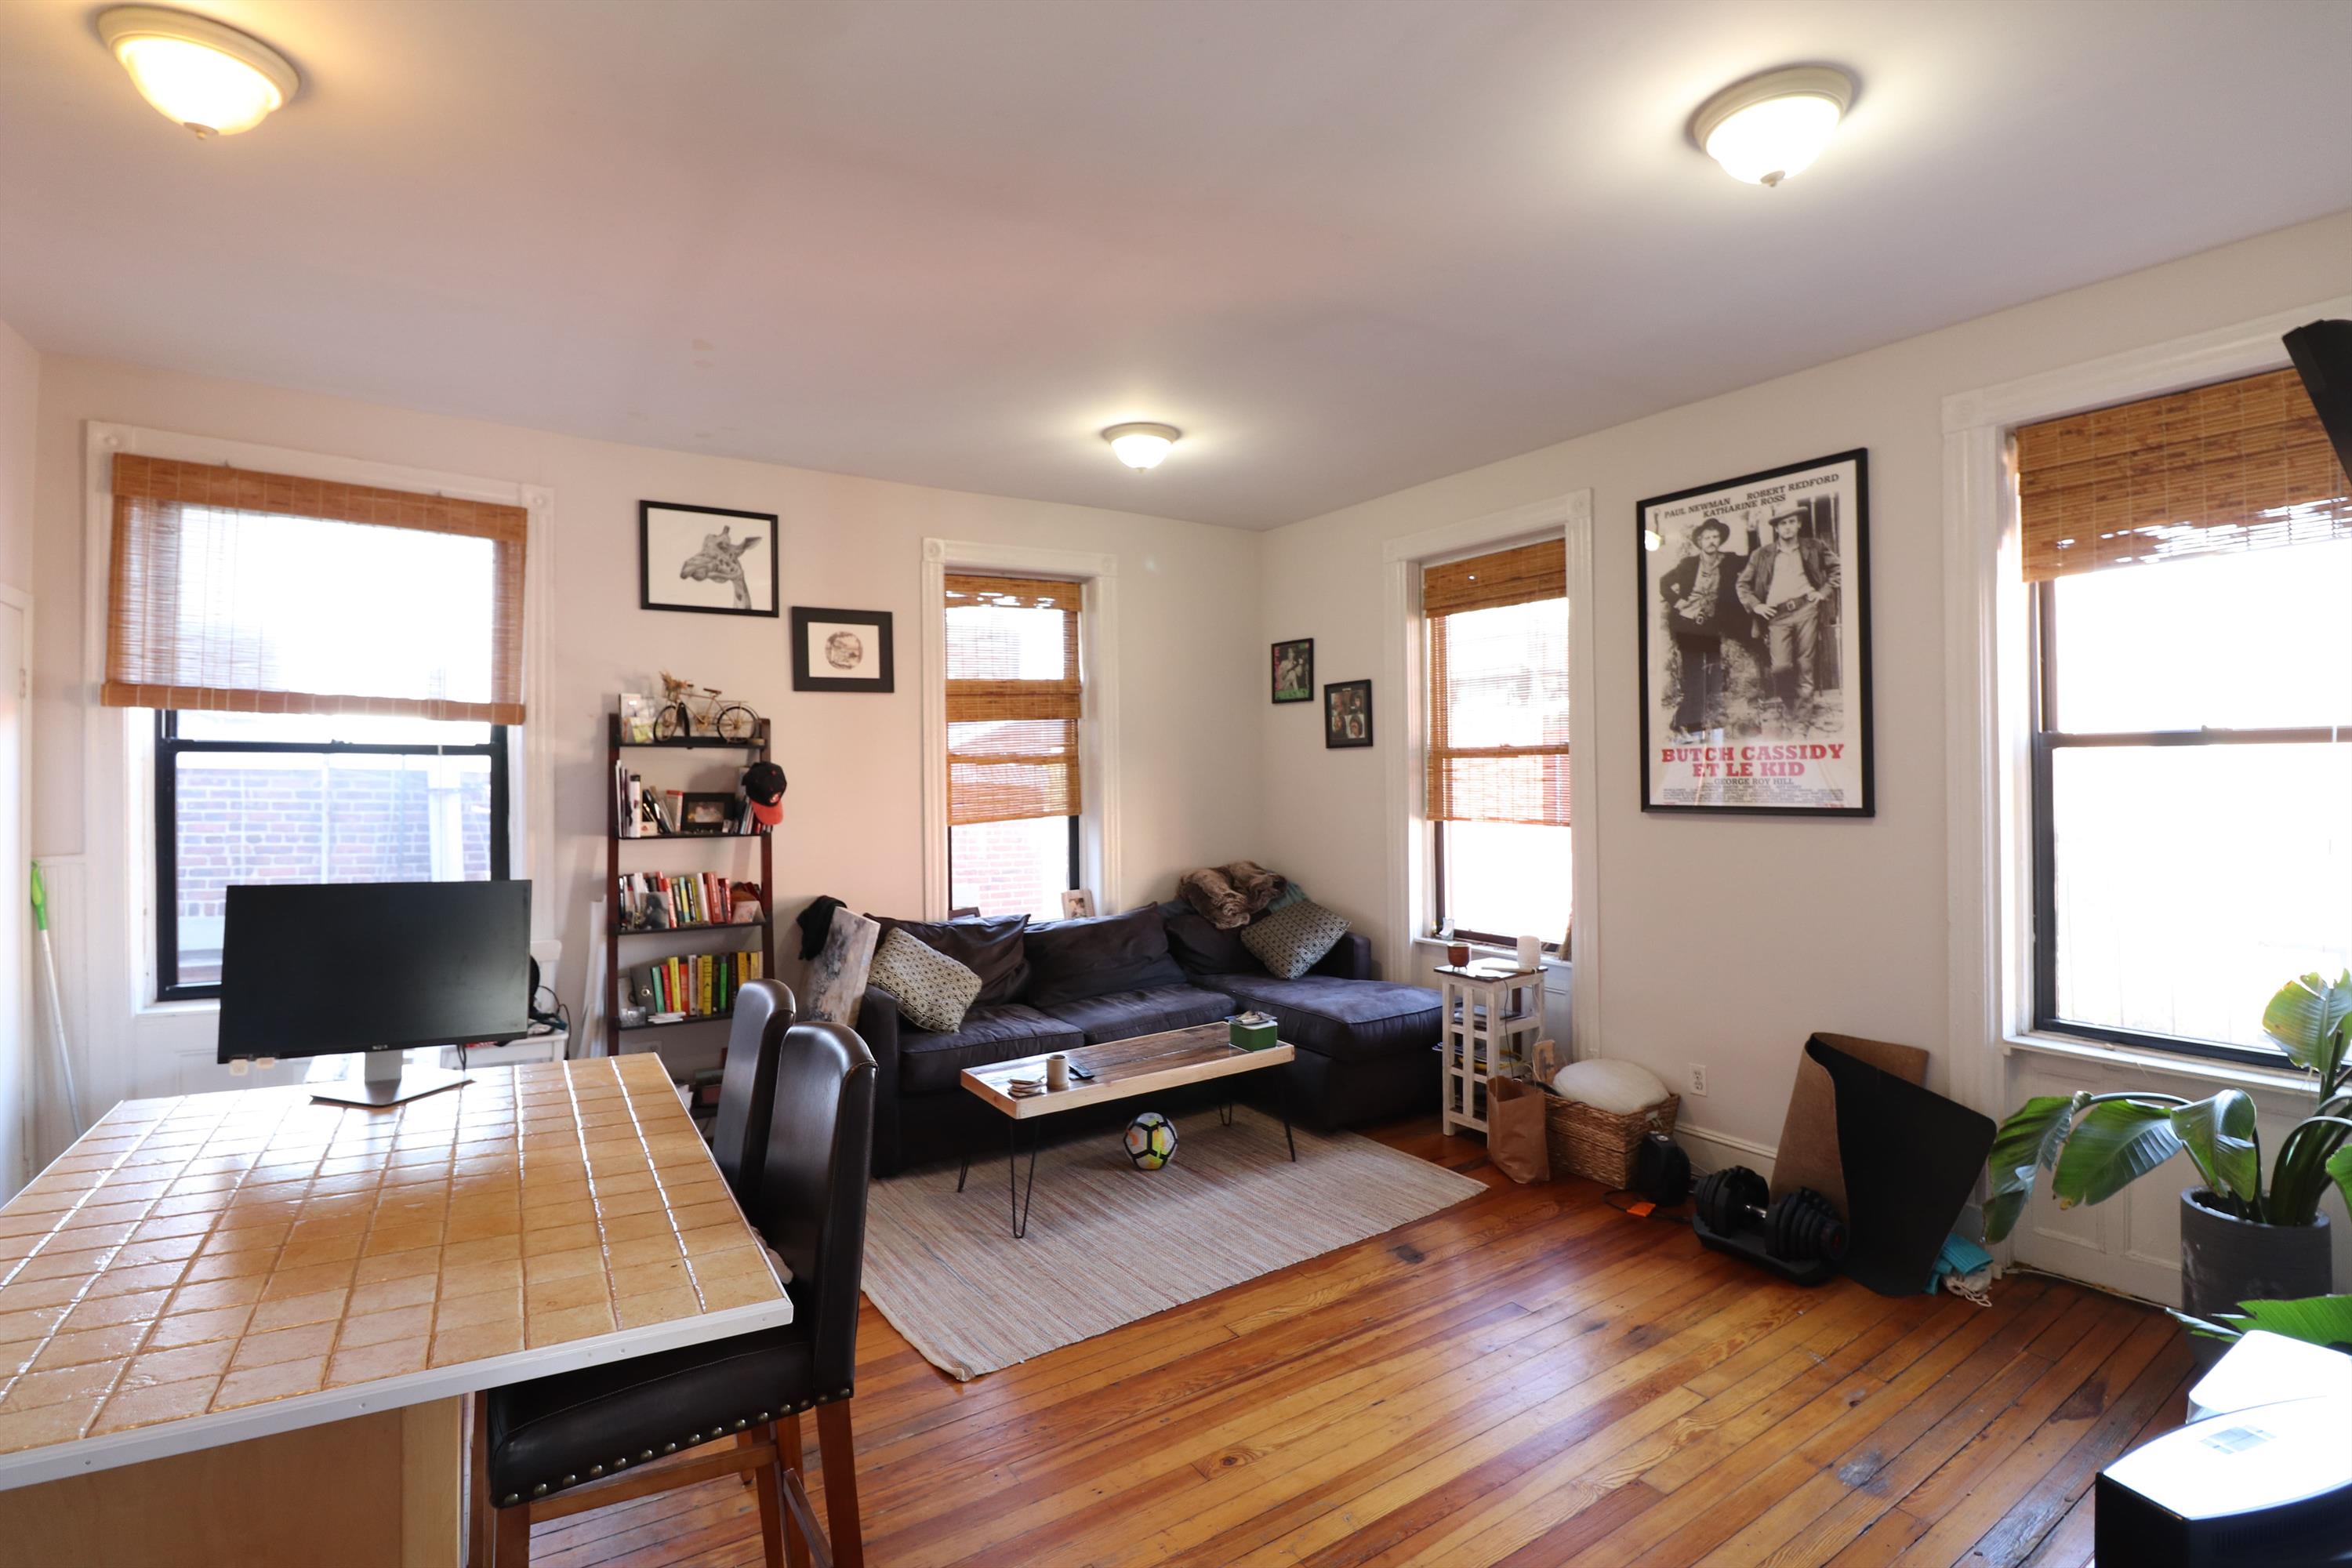 ***NO BROKER FEE***
Amazing location for a 1 bed 1 bath apartment. Located on the corner of 2nd and Washington Street, on the top floor. Features include a nice boxy layout, hardwood floors, and flooded with light. Apartment entrance is located on court street.